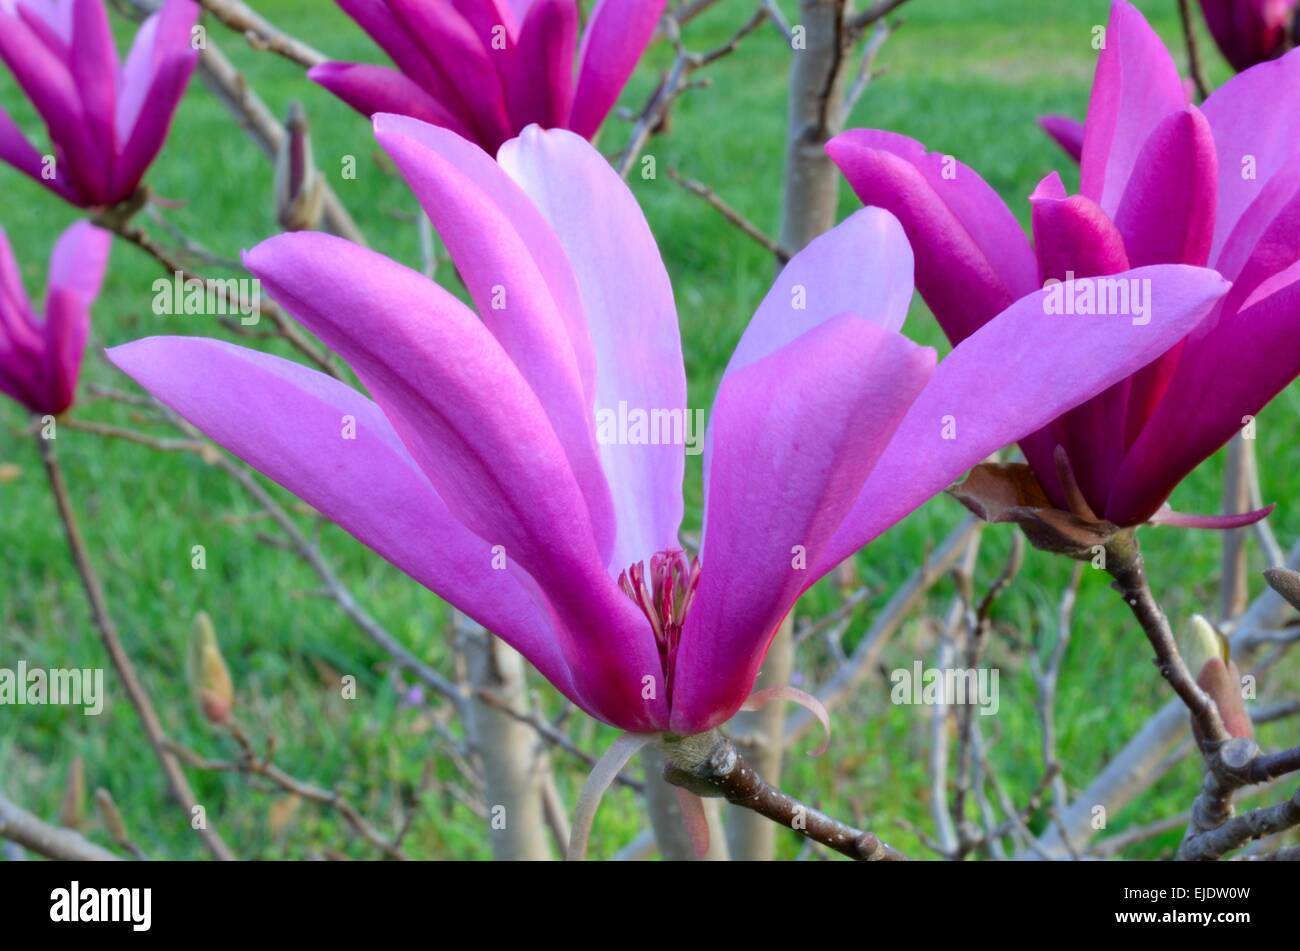 Beautiful pink bloom of a flowering magnolia pink tulip tree. Colorful nature background of pink petals. Stock Photo